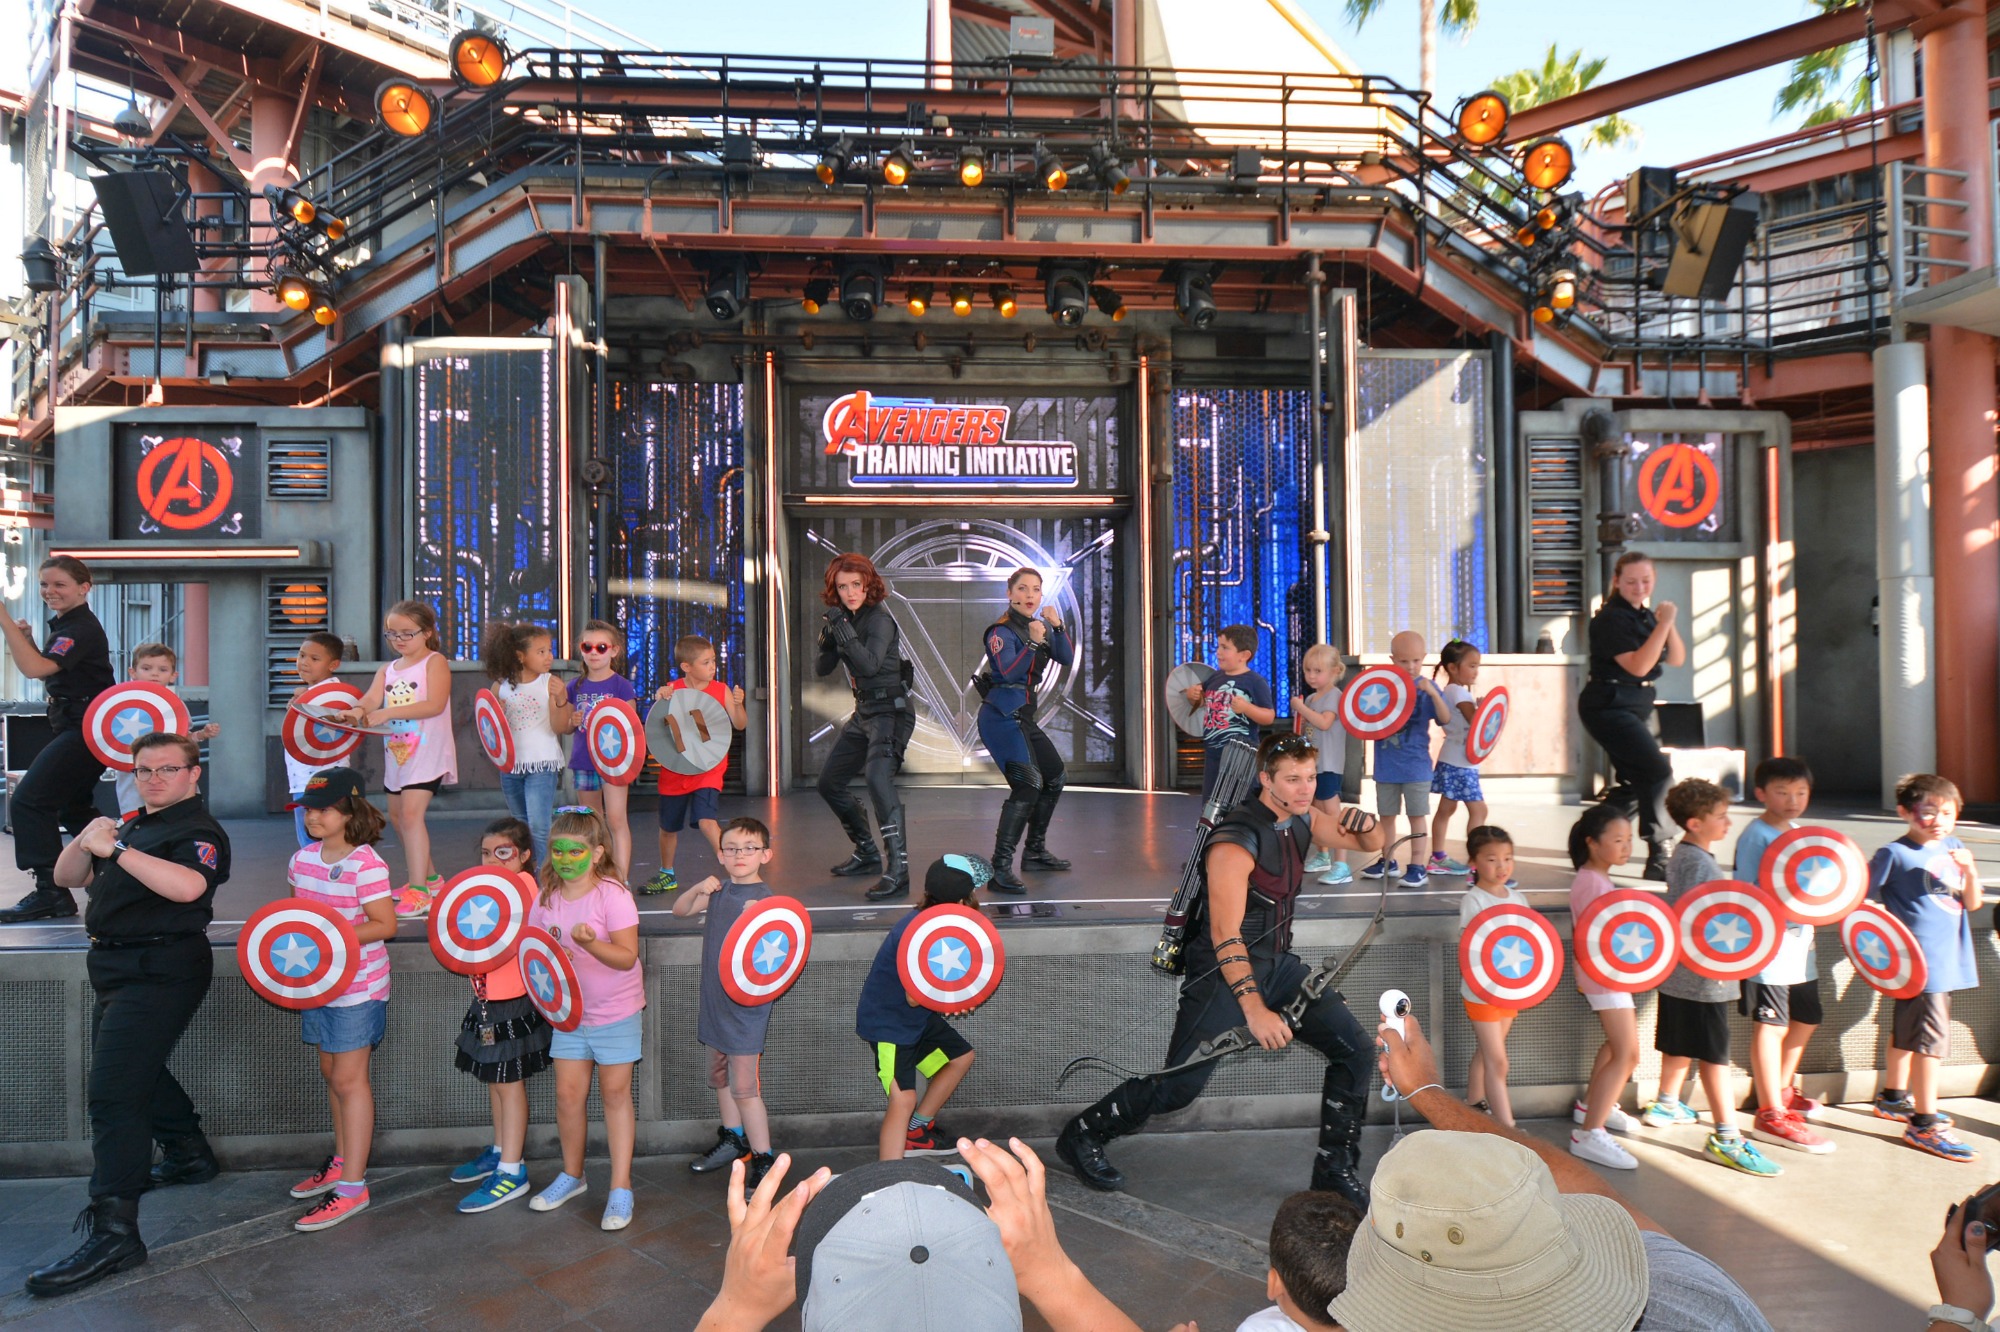 Summer of Heroes is in full swing. Here is everything you need to know about Summer of Heroes at Disneyland.